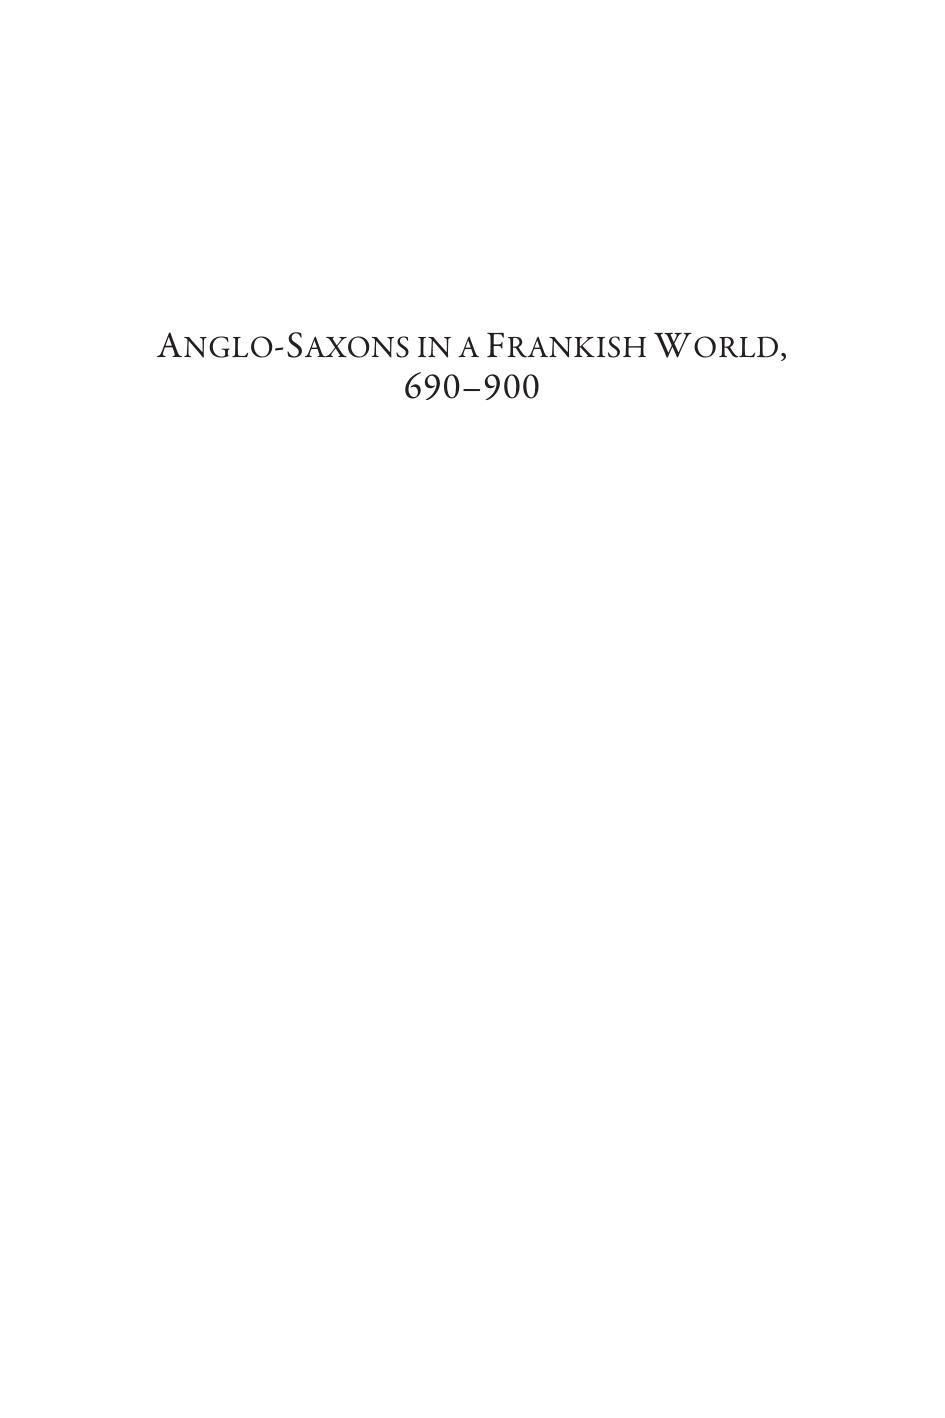 Anglo-Saxons in a Frankish World, 690-900 (Studies in the Early Middle Ages) by James T Palmer